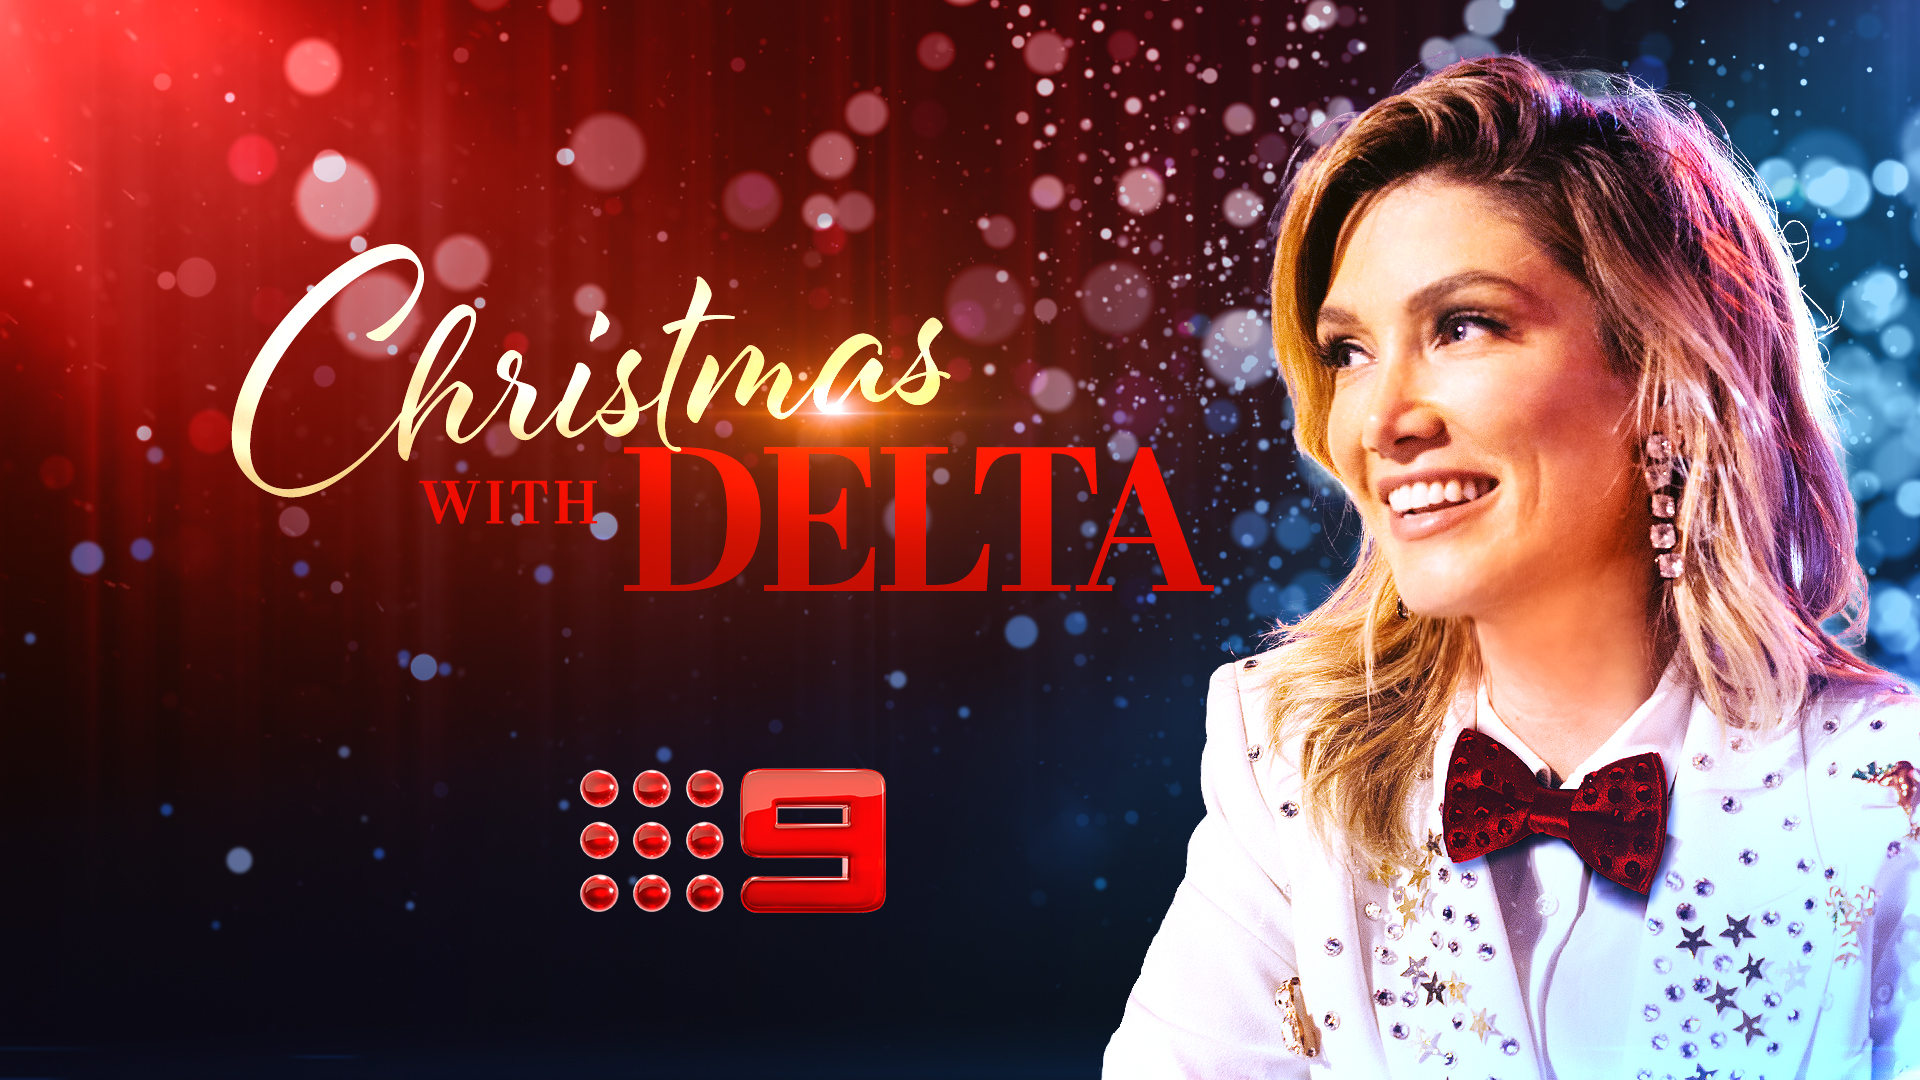 Christmas with Delta Visit Chatswood